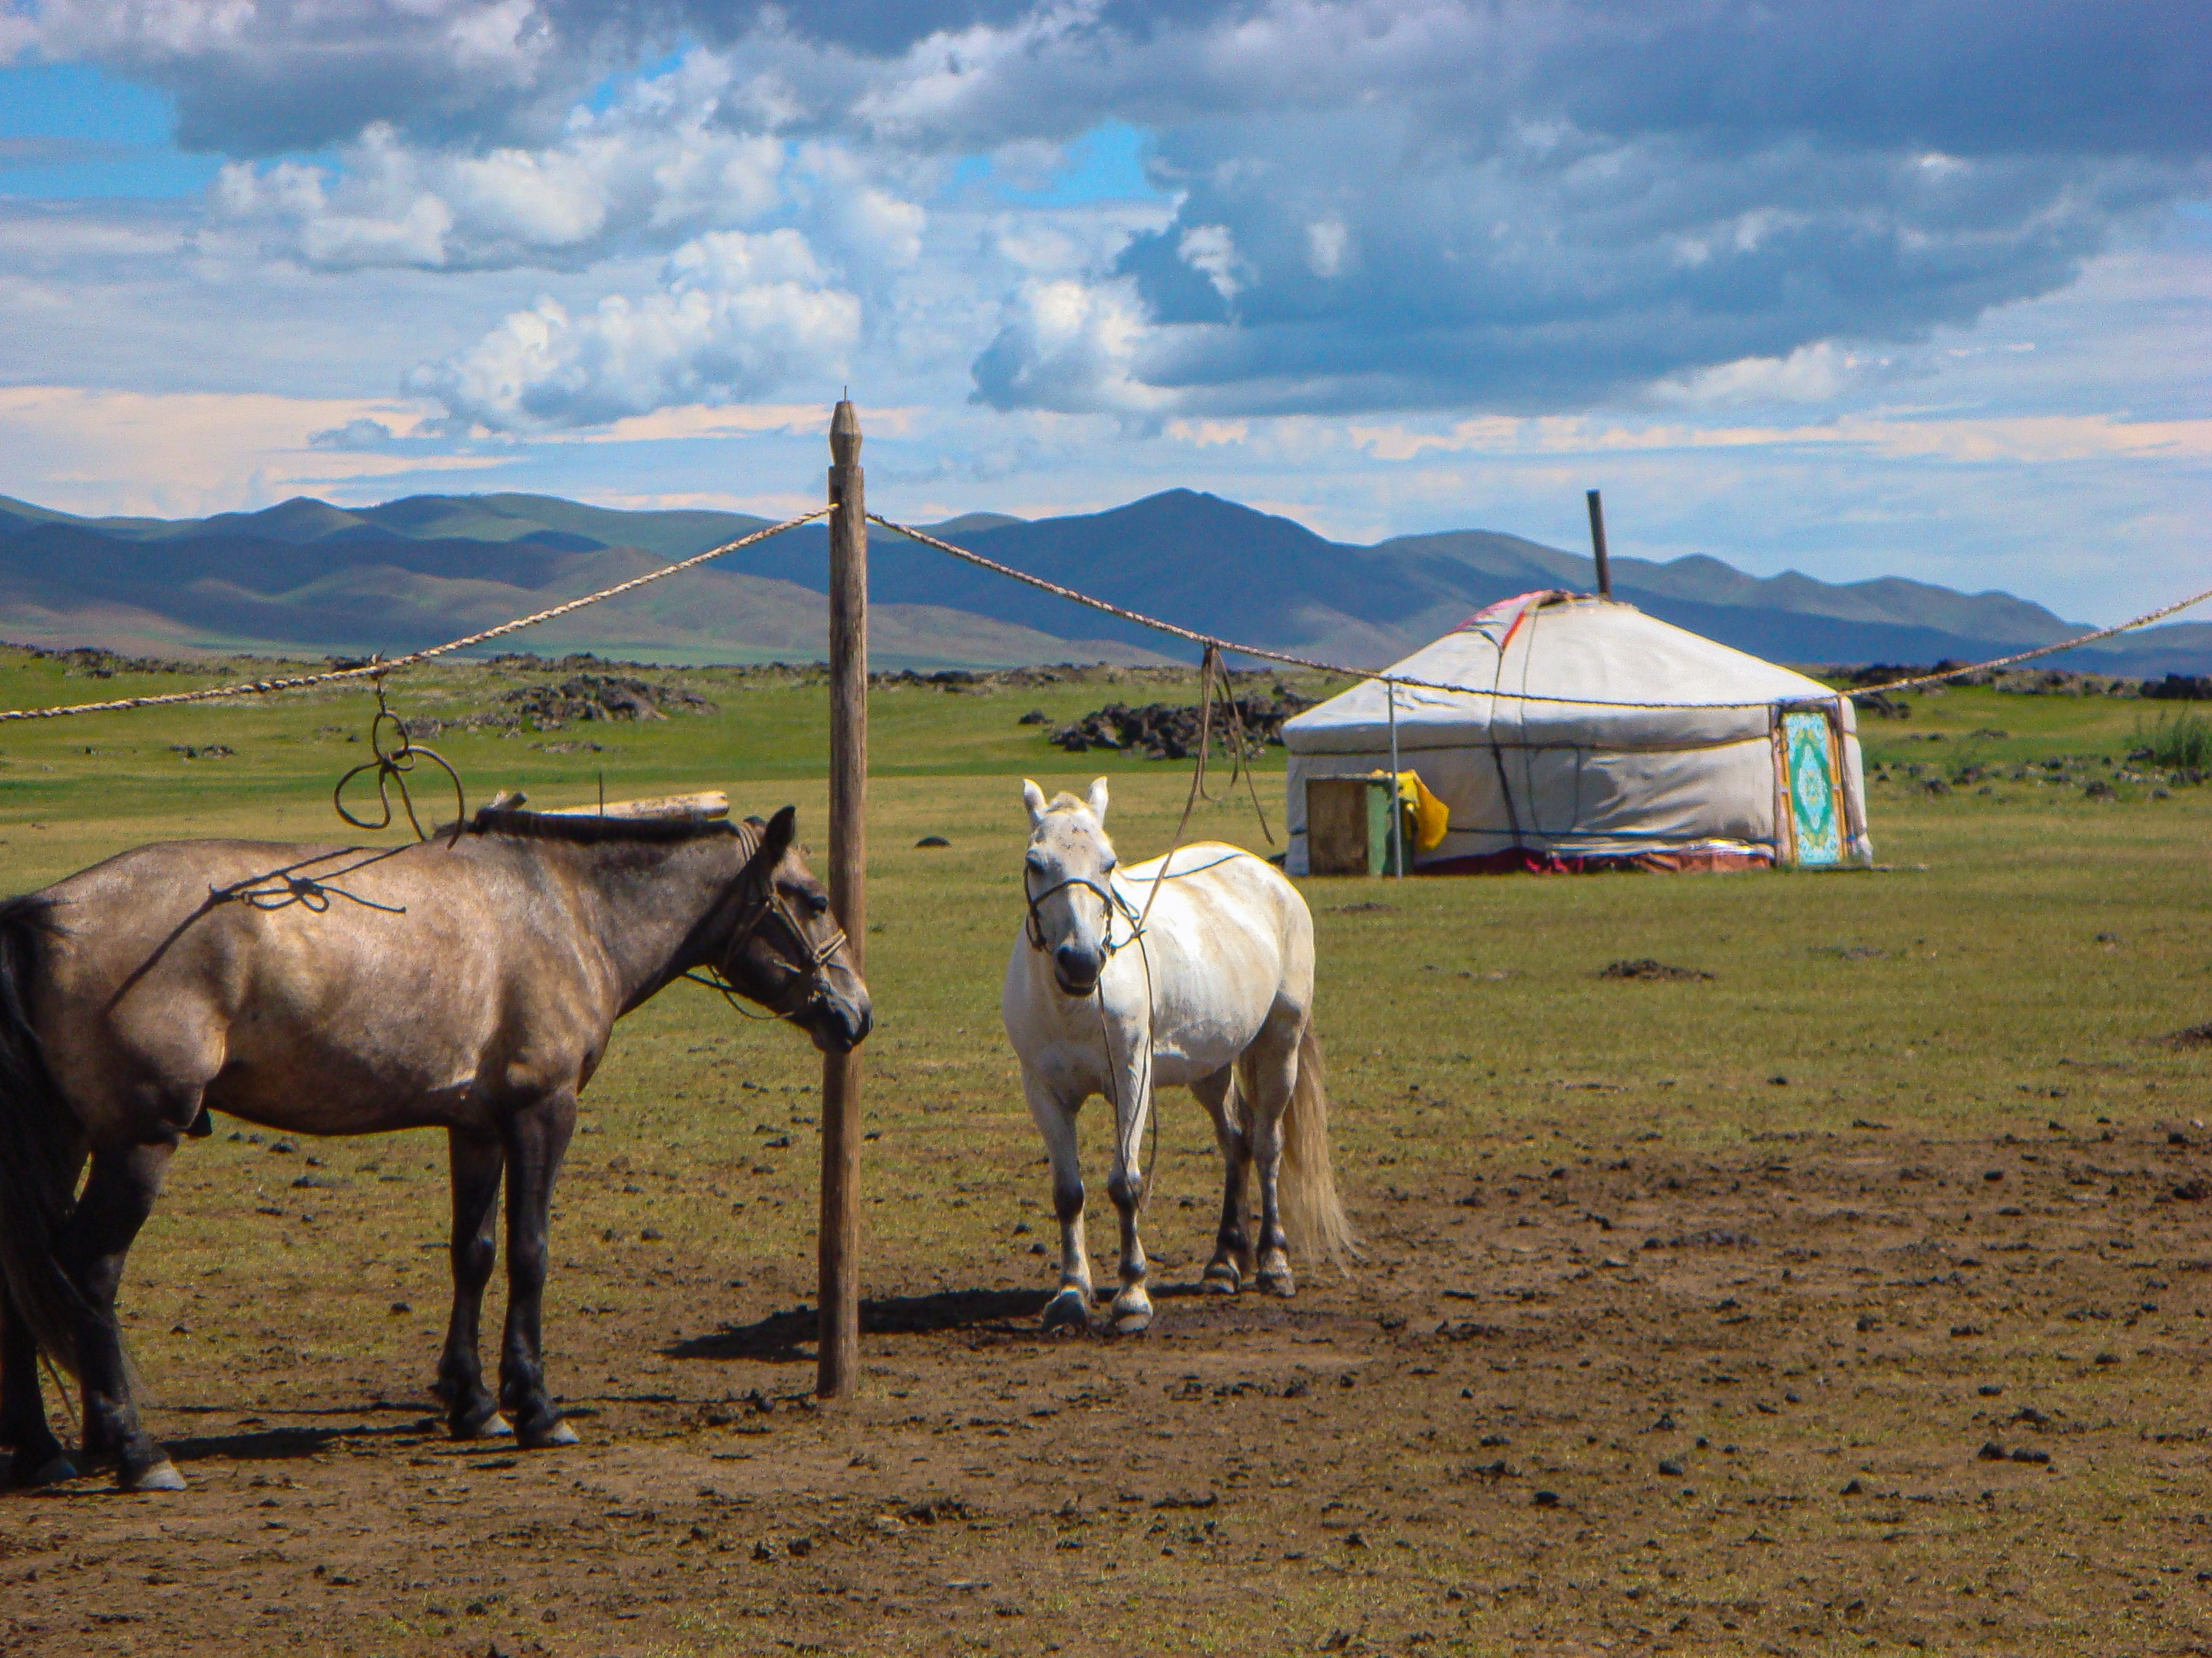 A Ger Camp in Mongolia